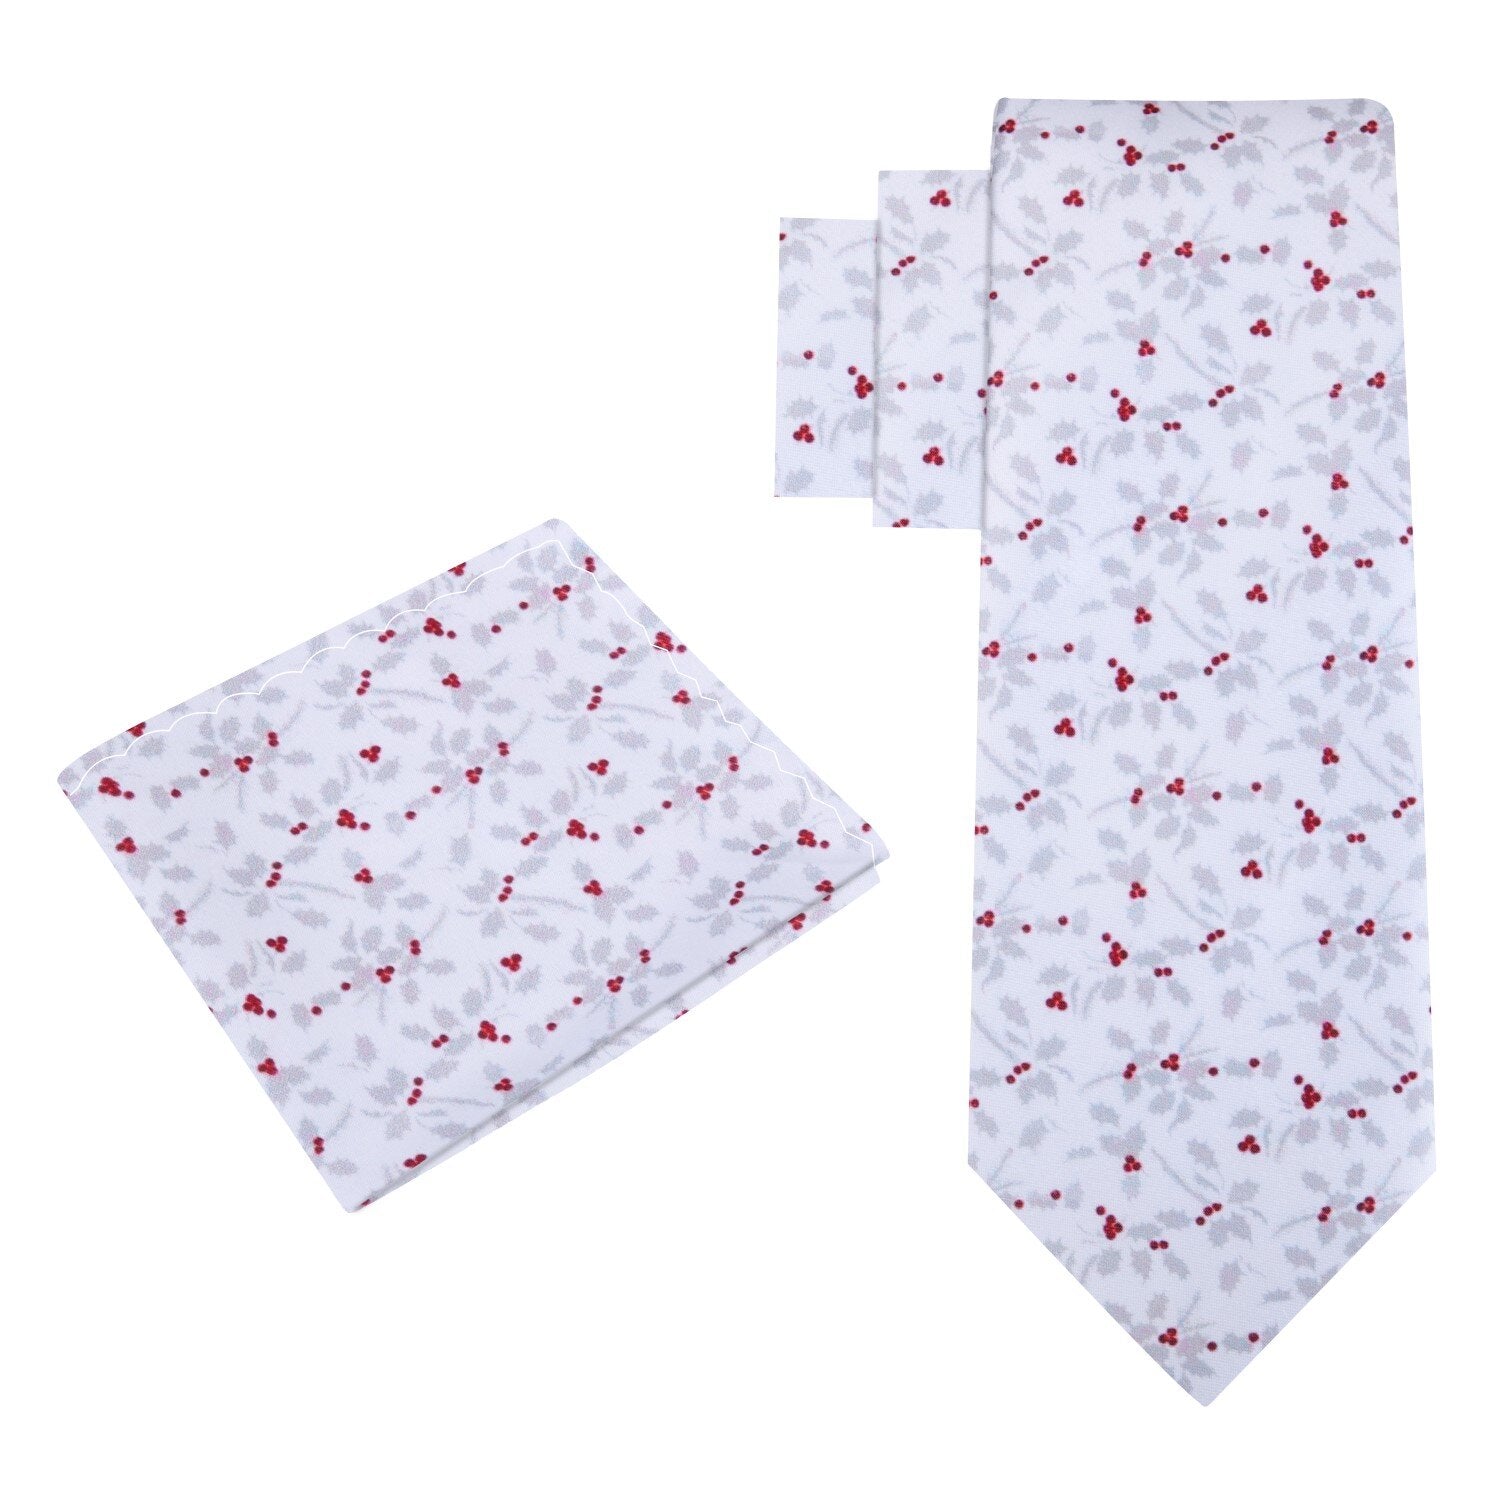 Alt View: White, Red, Silver Holly Berries Tie And Pocket Square